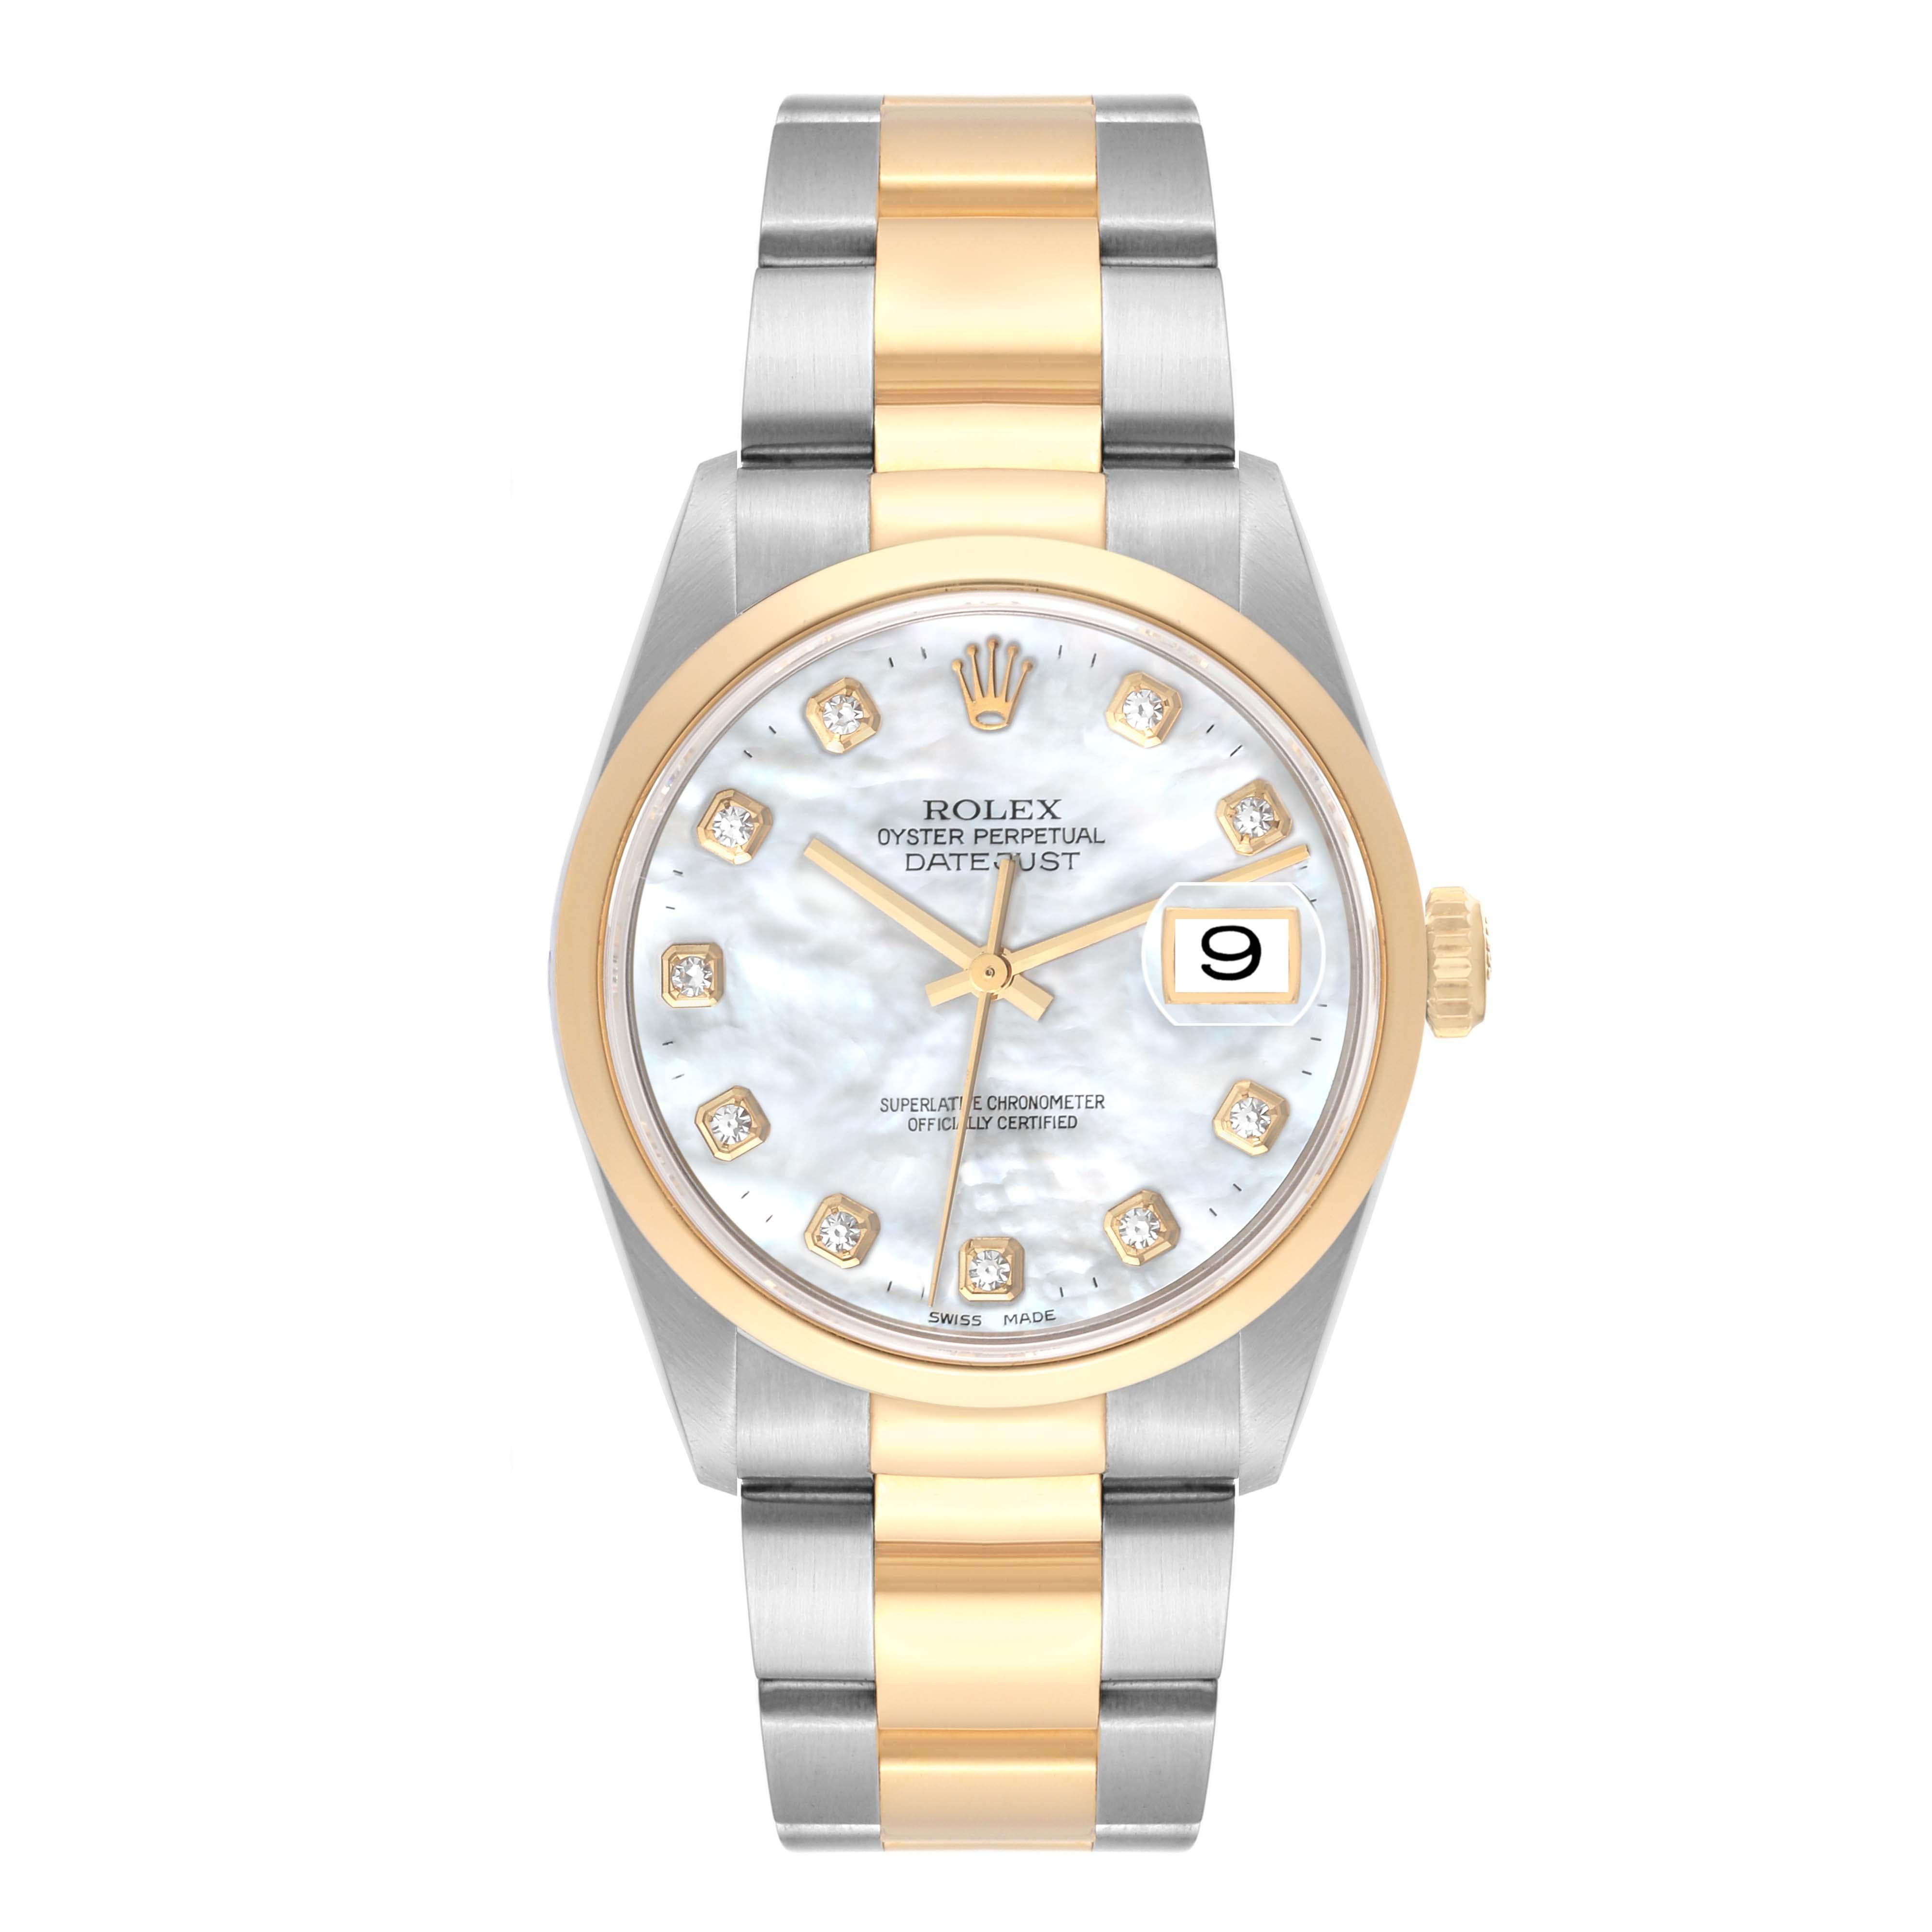 Rolex Datejust Steel Yellow Gold Mother Of Pearl Diamond Dial Mens Watch 16203 Box Papers. Officially certified chronometer automatic self-winding movement. Stainless steel case 36 mm in diameter. Rolex logo on an 18K yellow gold crown. 18k yellow